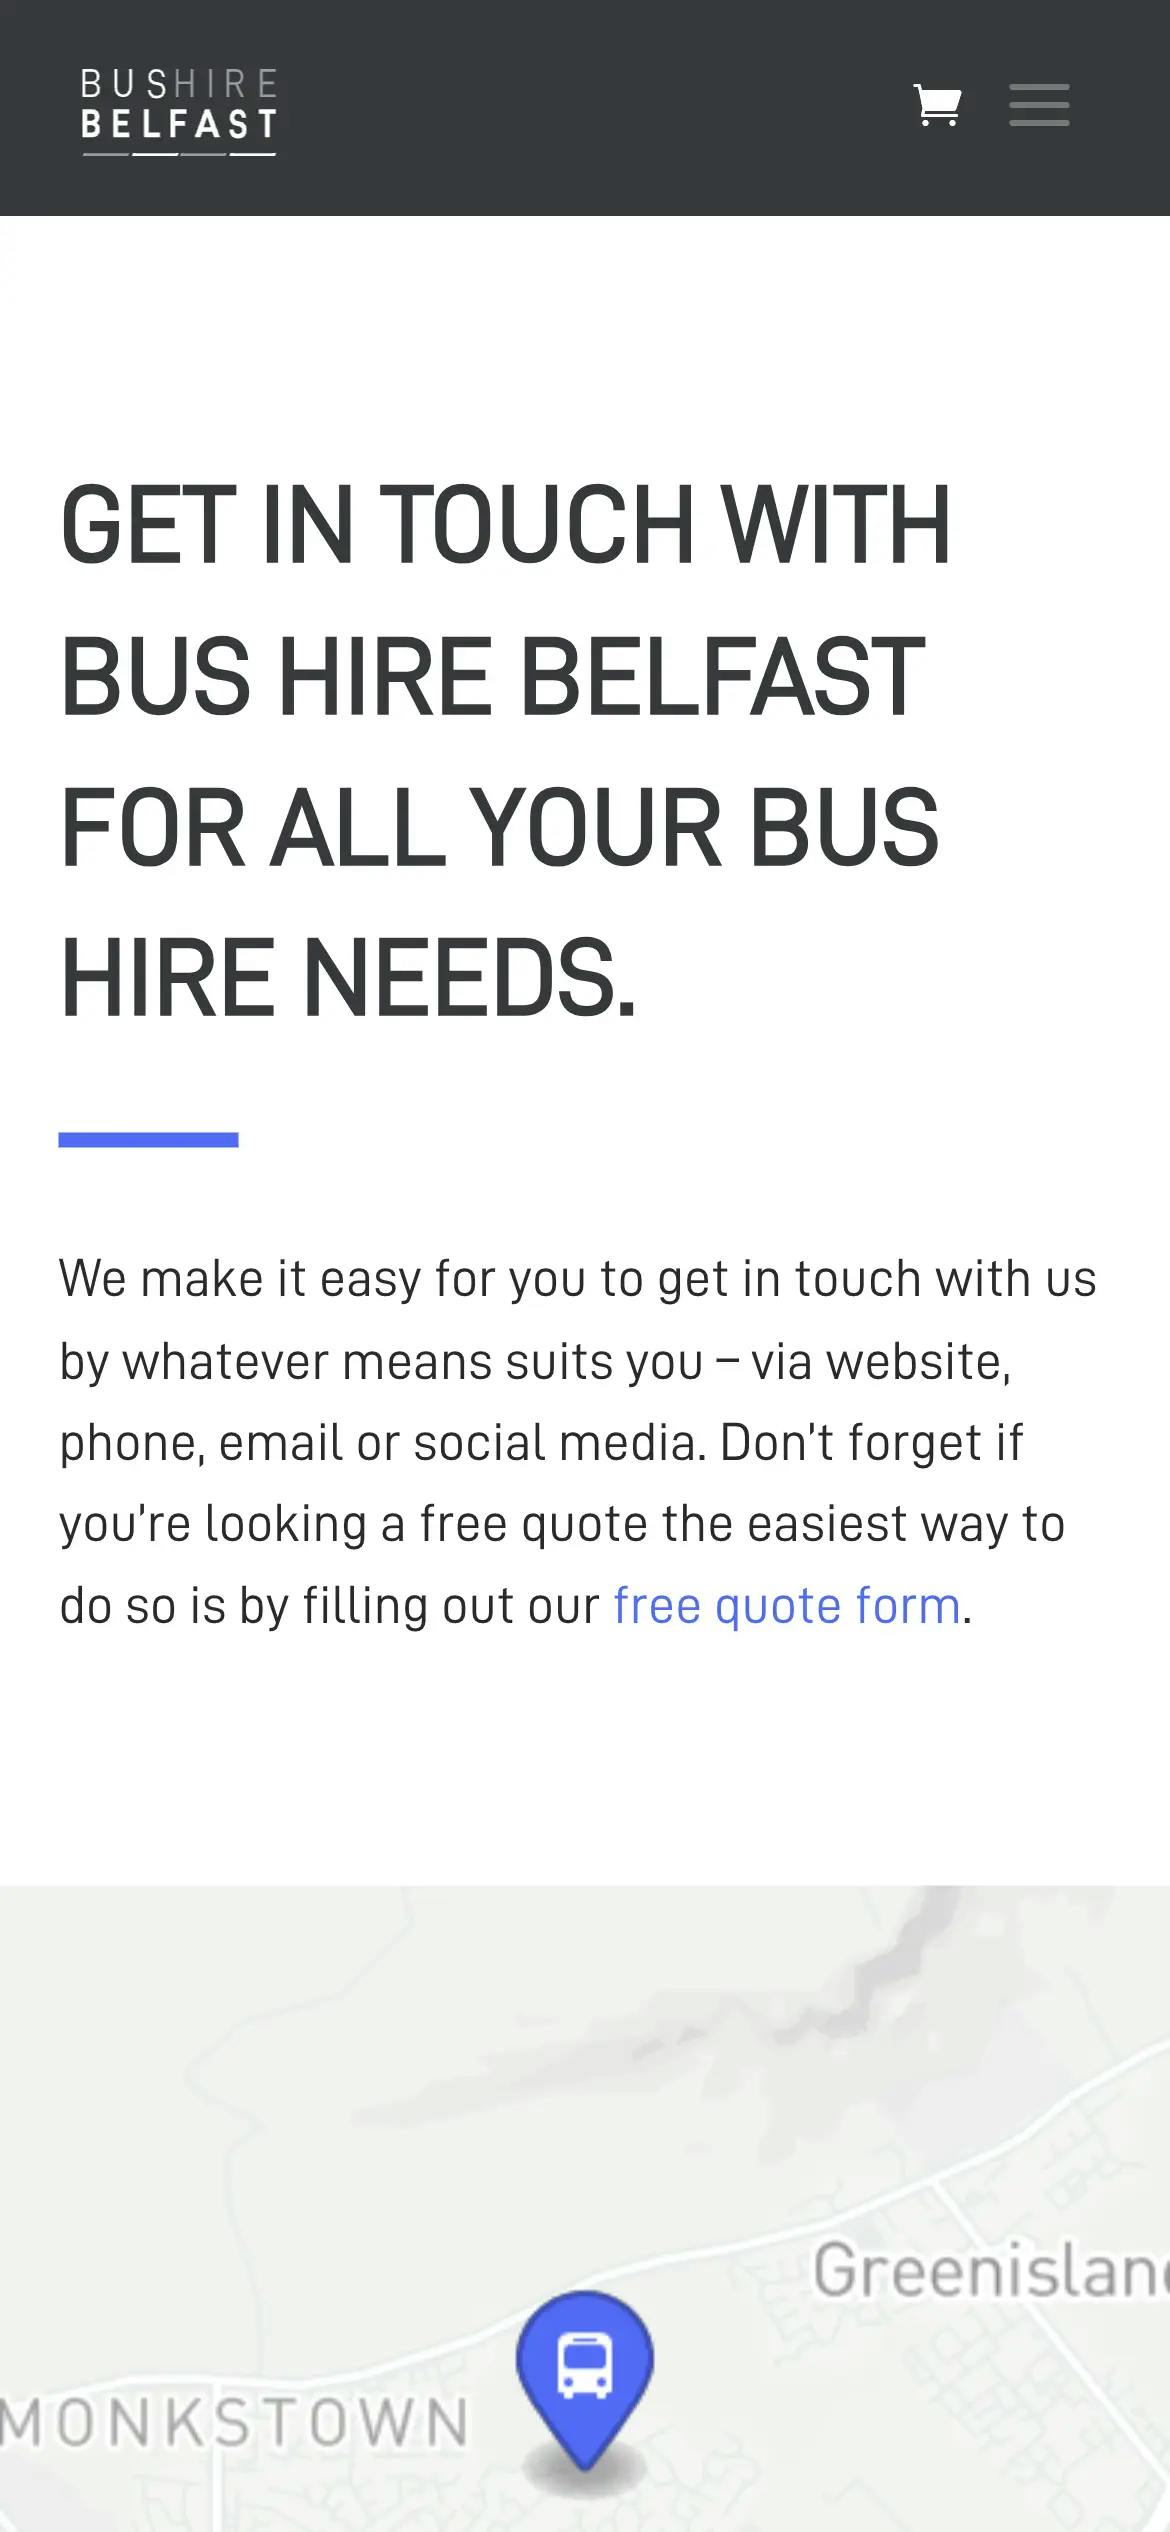 Bus Hire Belfast contact page website design on mobile